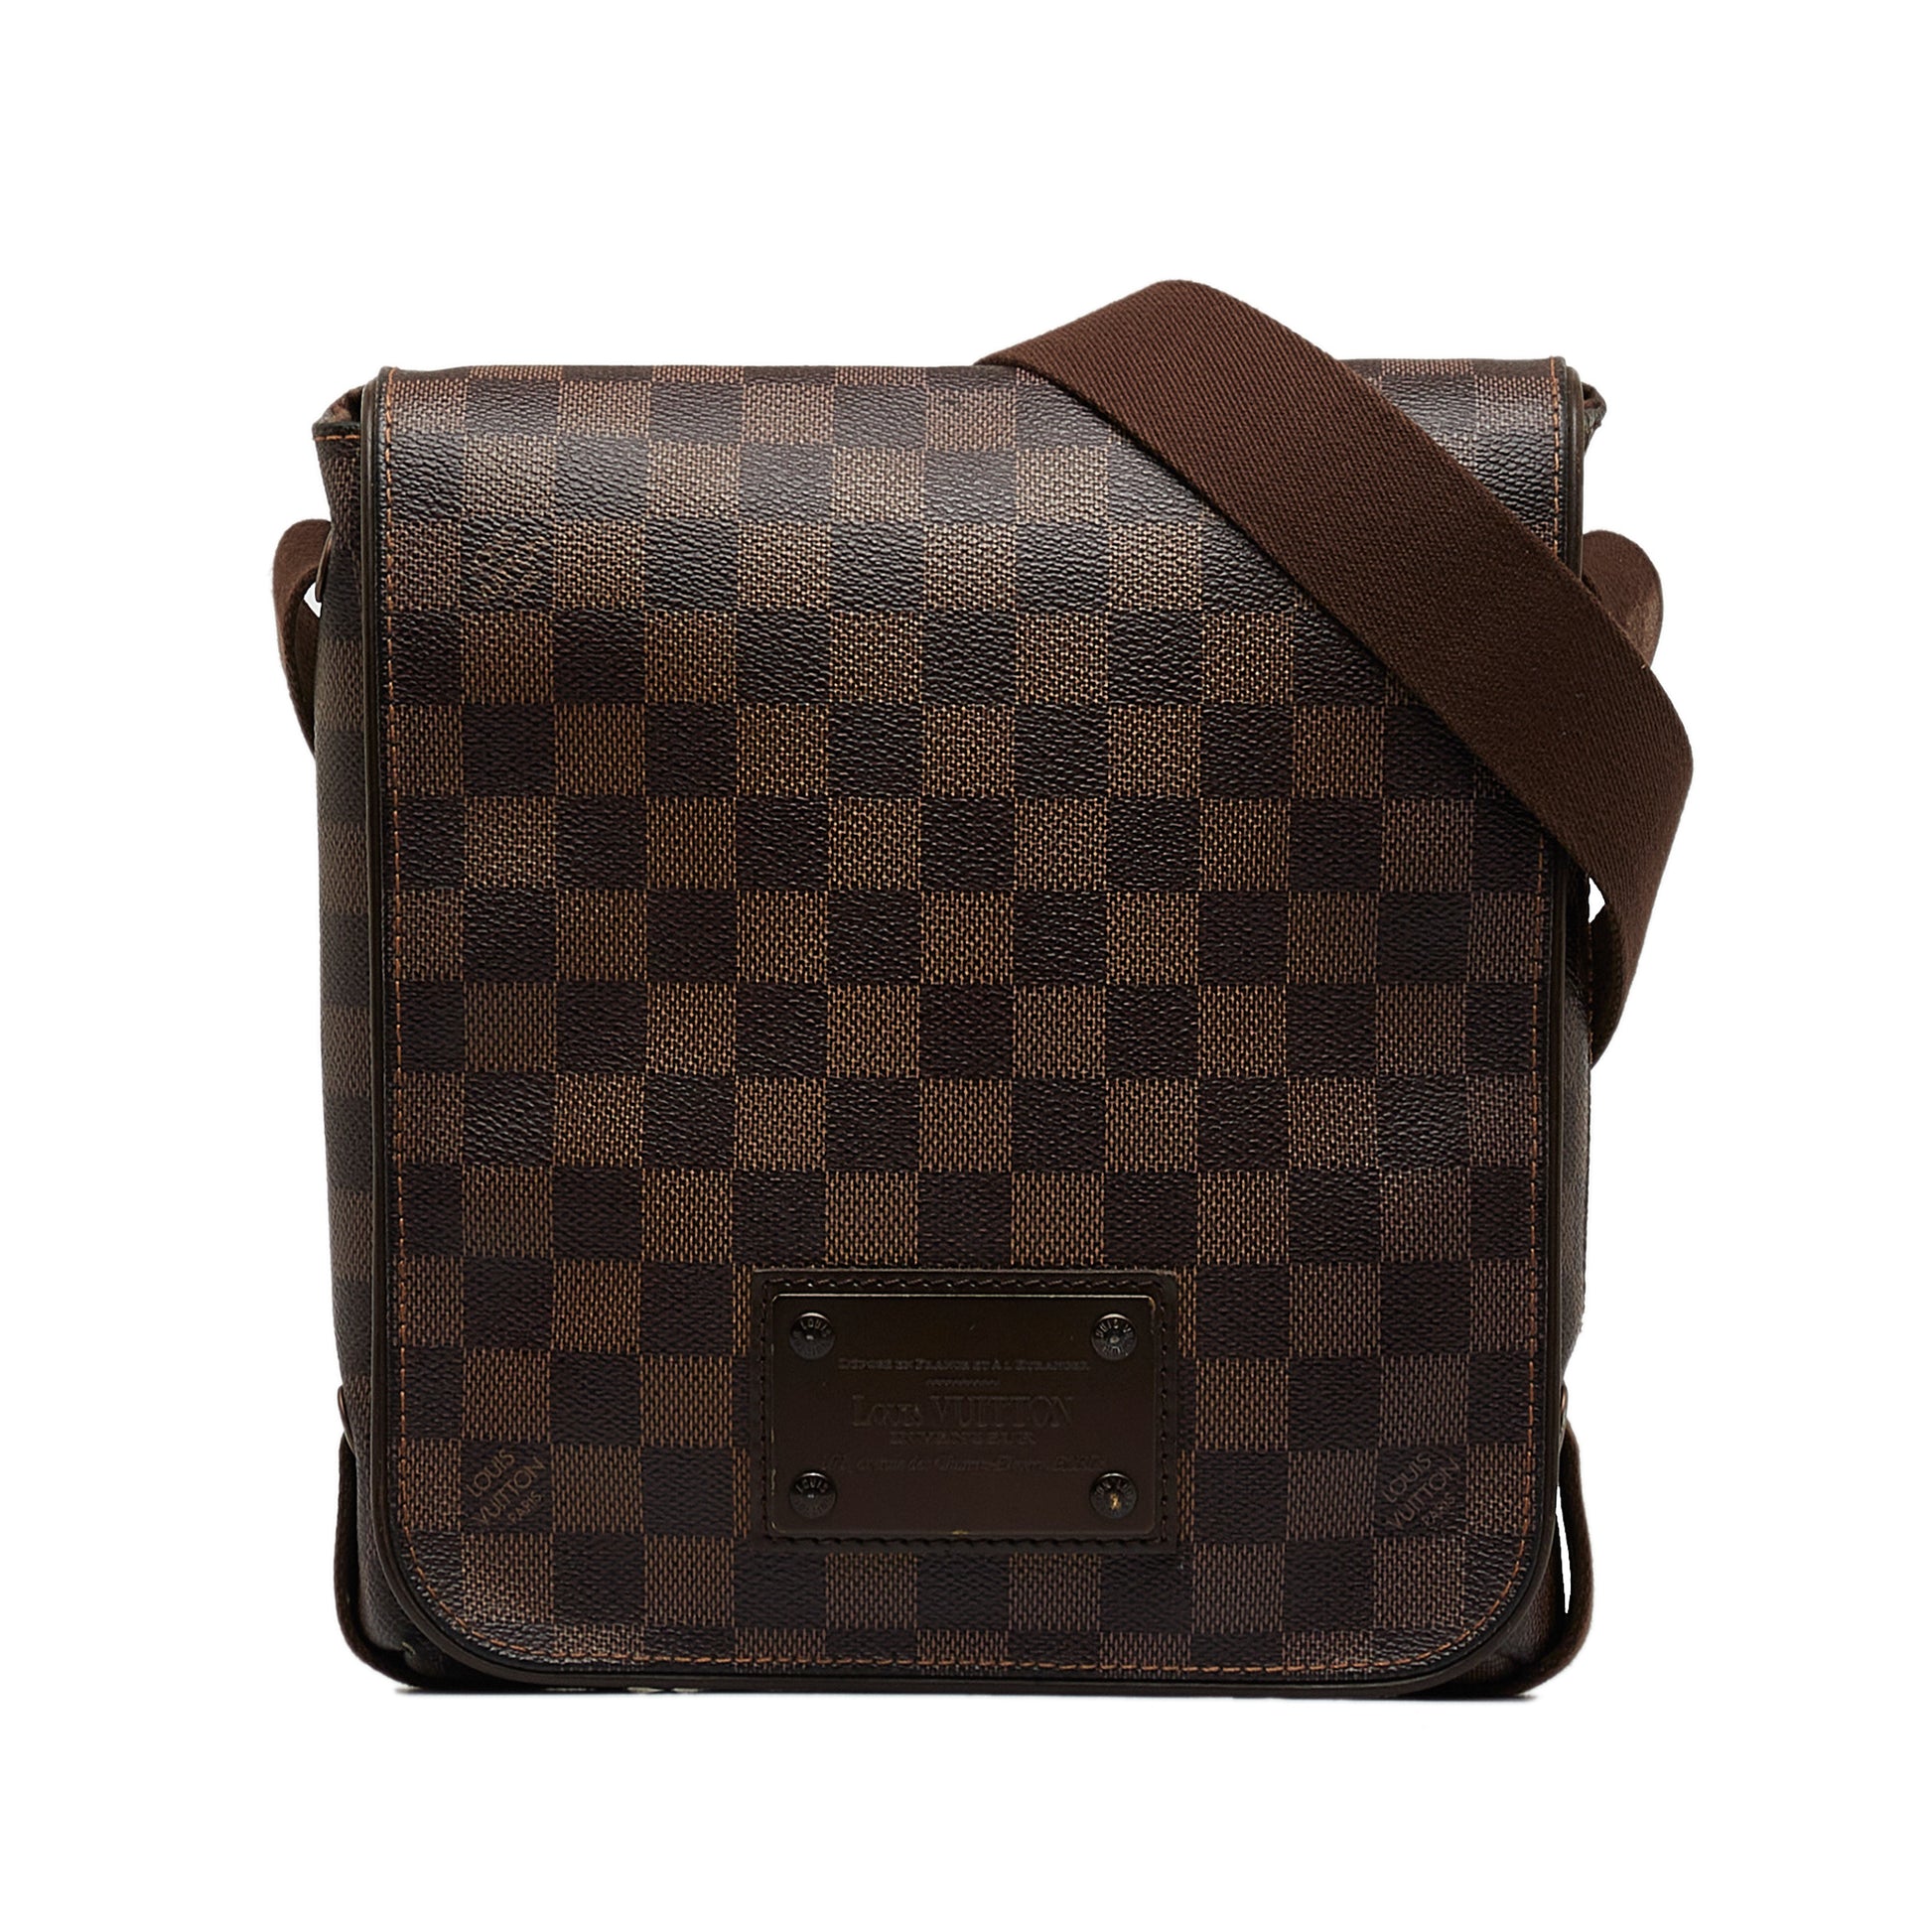 Louis Vuitton Crossbody Bags & Handbags for Women with Features